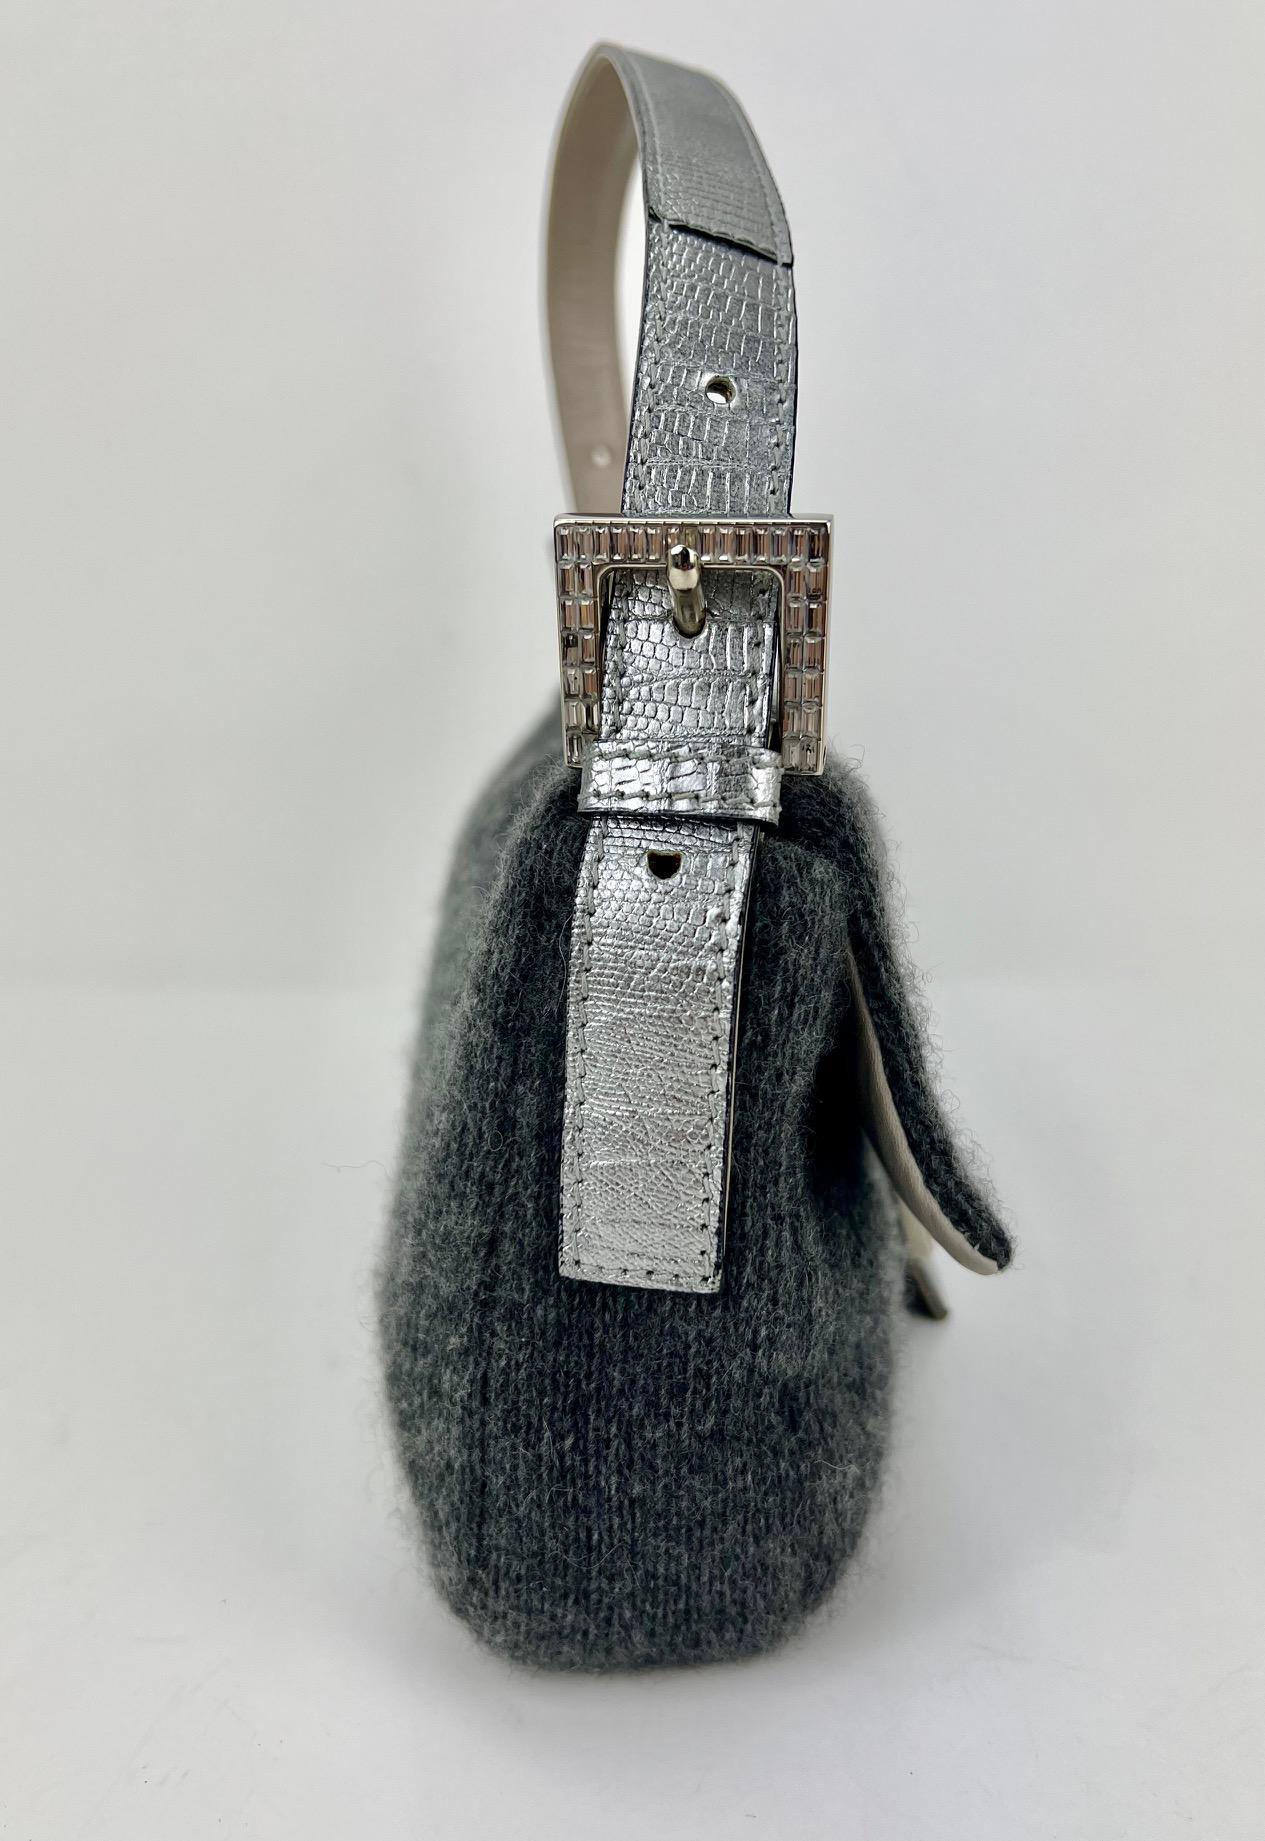 Pre-Owned  100% Authentic
FENDI Wool Crystal Grey Baguette Shoulder Bag
RATING: B...Very Good, well maintained,
shows minor signs of wear
MATERIAL: wool, leather, metallic
HANDLE:  adjustable leather strap, 1 side 
buckle is missing 6 crystals